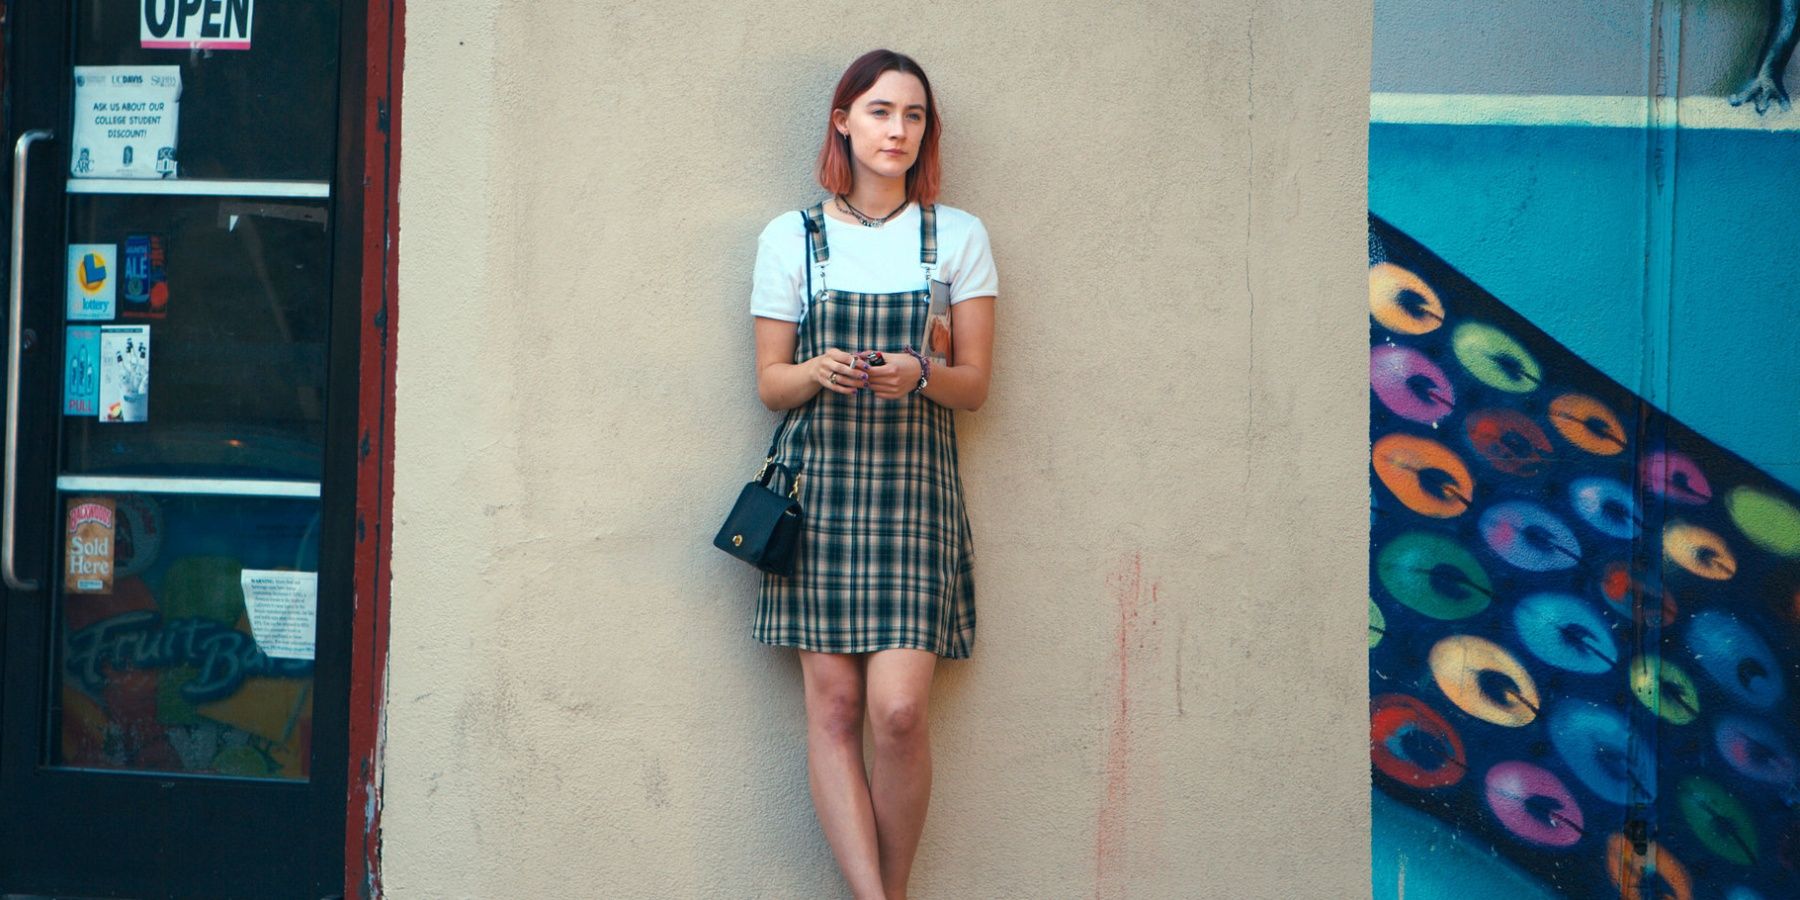 10 Things Lady Bird Gets Exactly Right About Growing Up